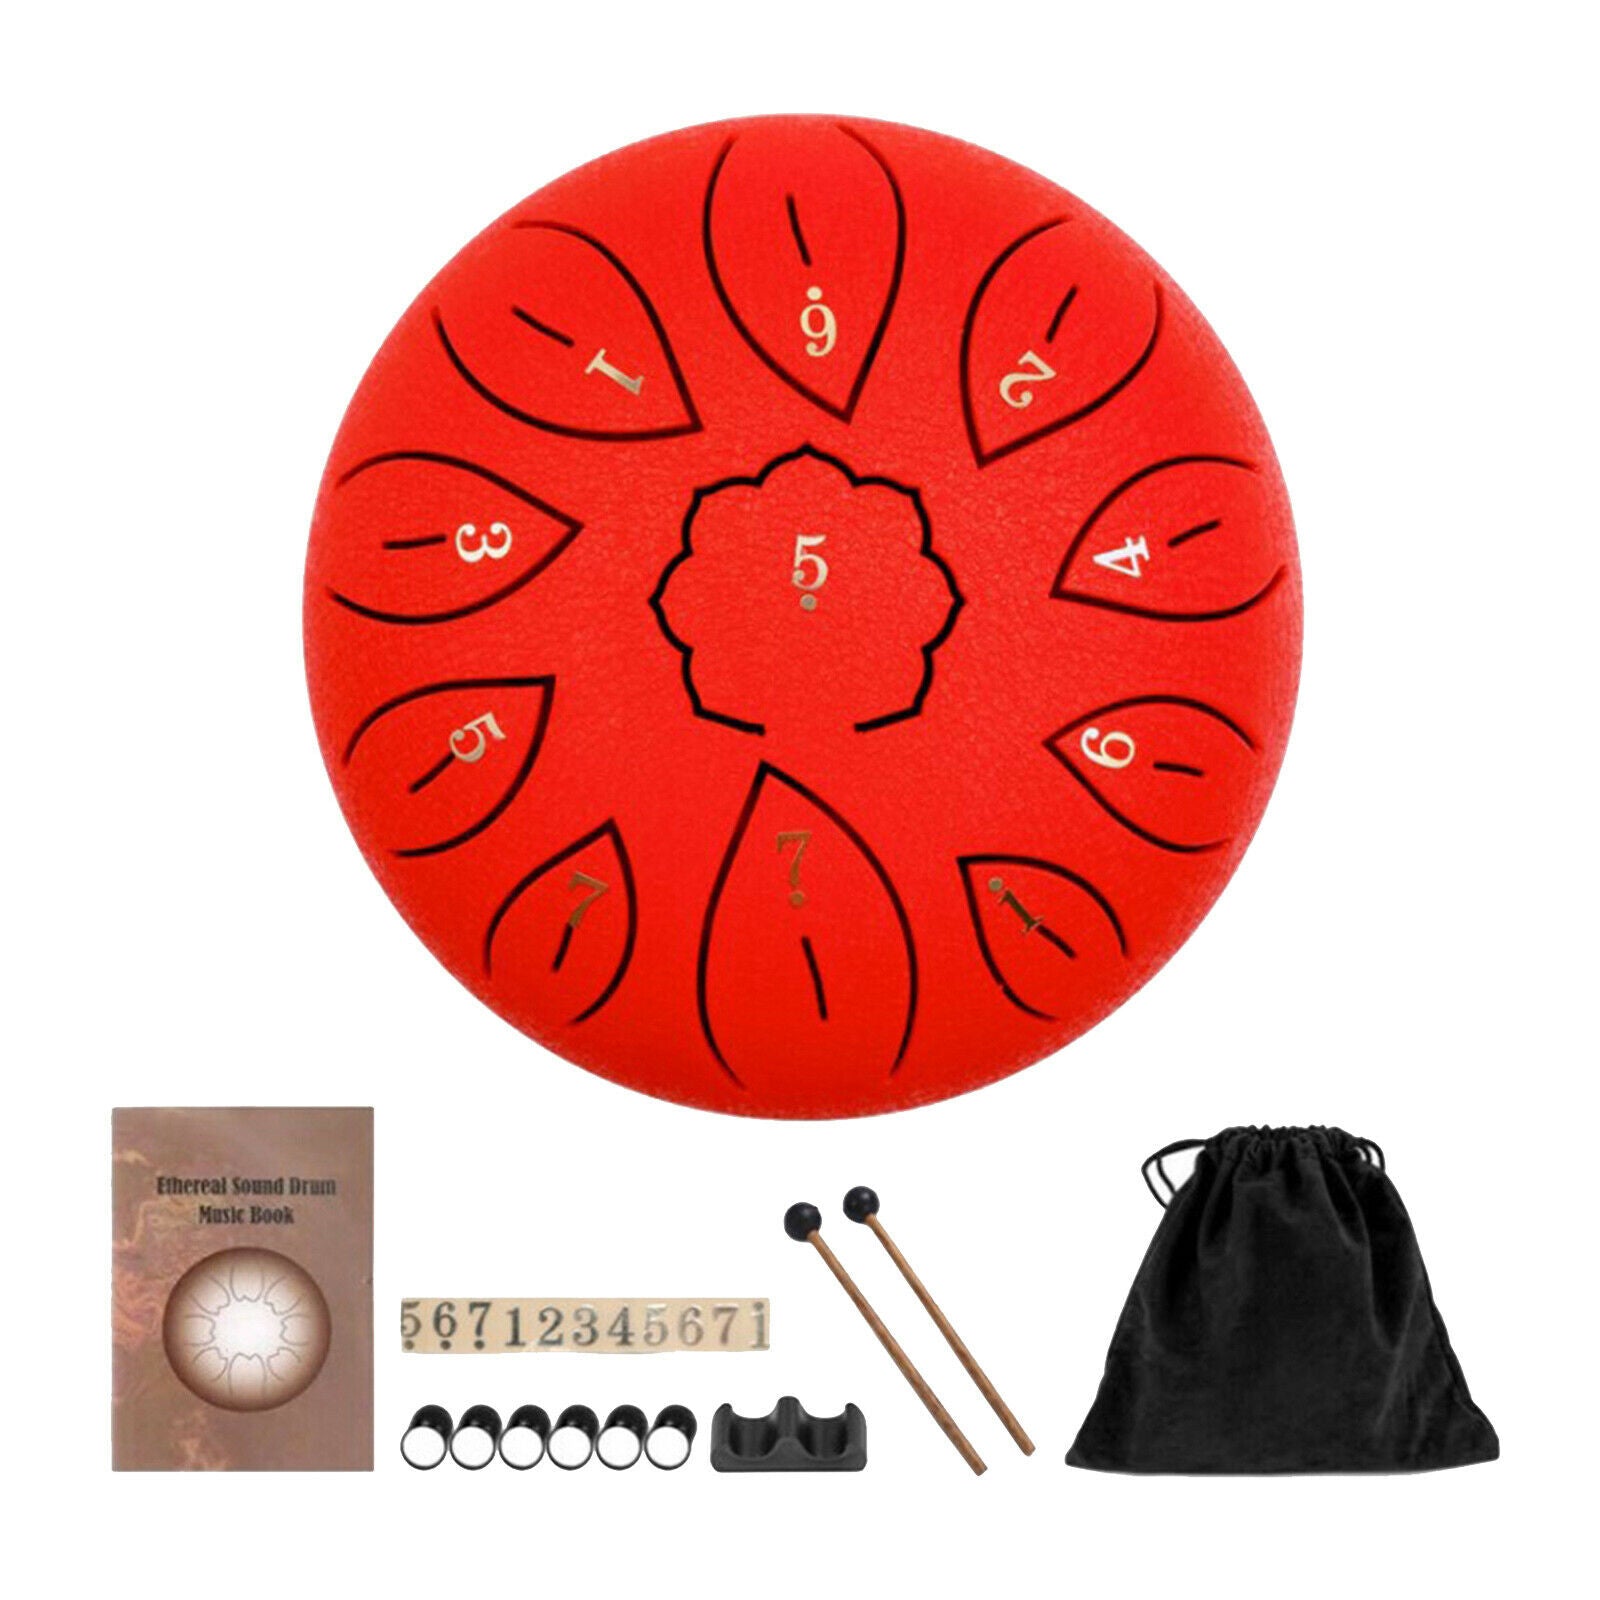 11 Tone 6" Steel Tongue Drum Handpan w/ Travel Bag Gift for Beginner Pro red